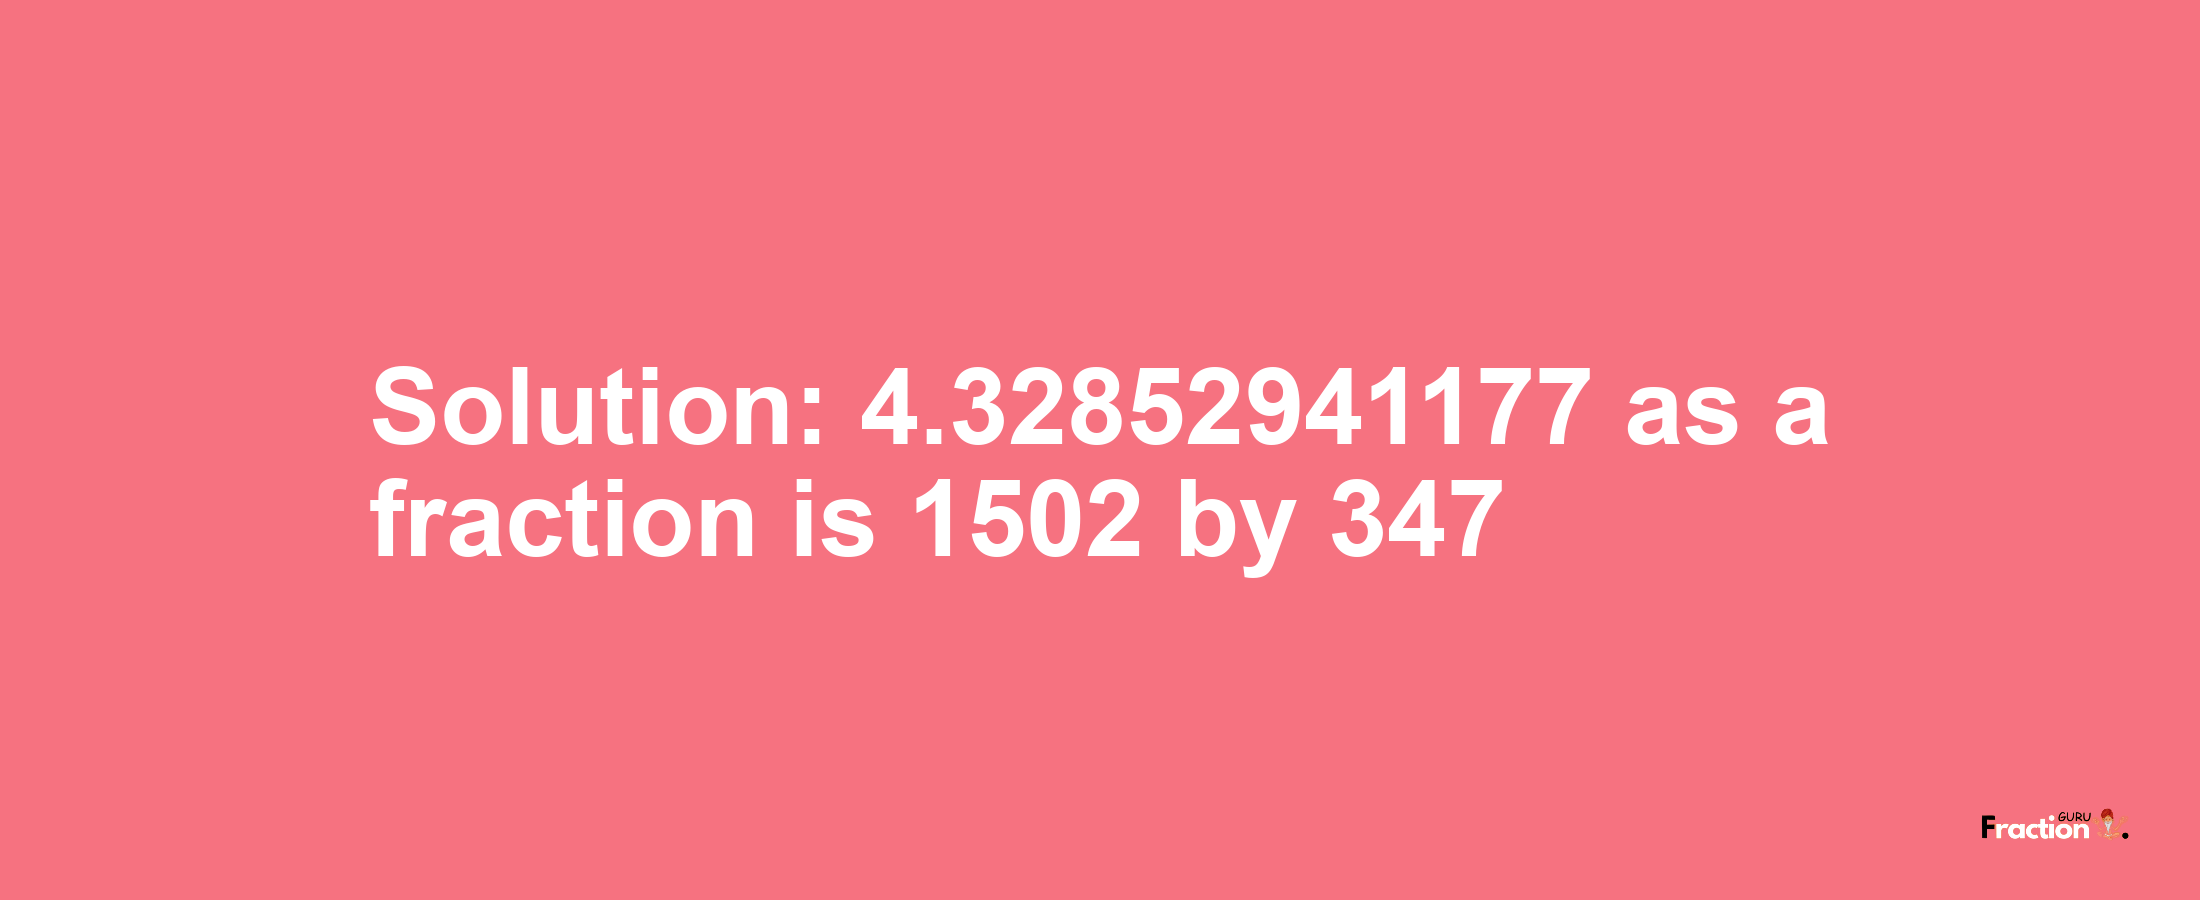 Solution:4.32852941177 as a fraction is 1502/347